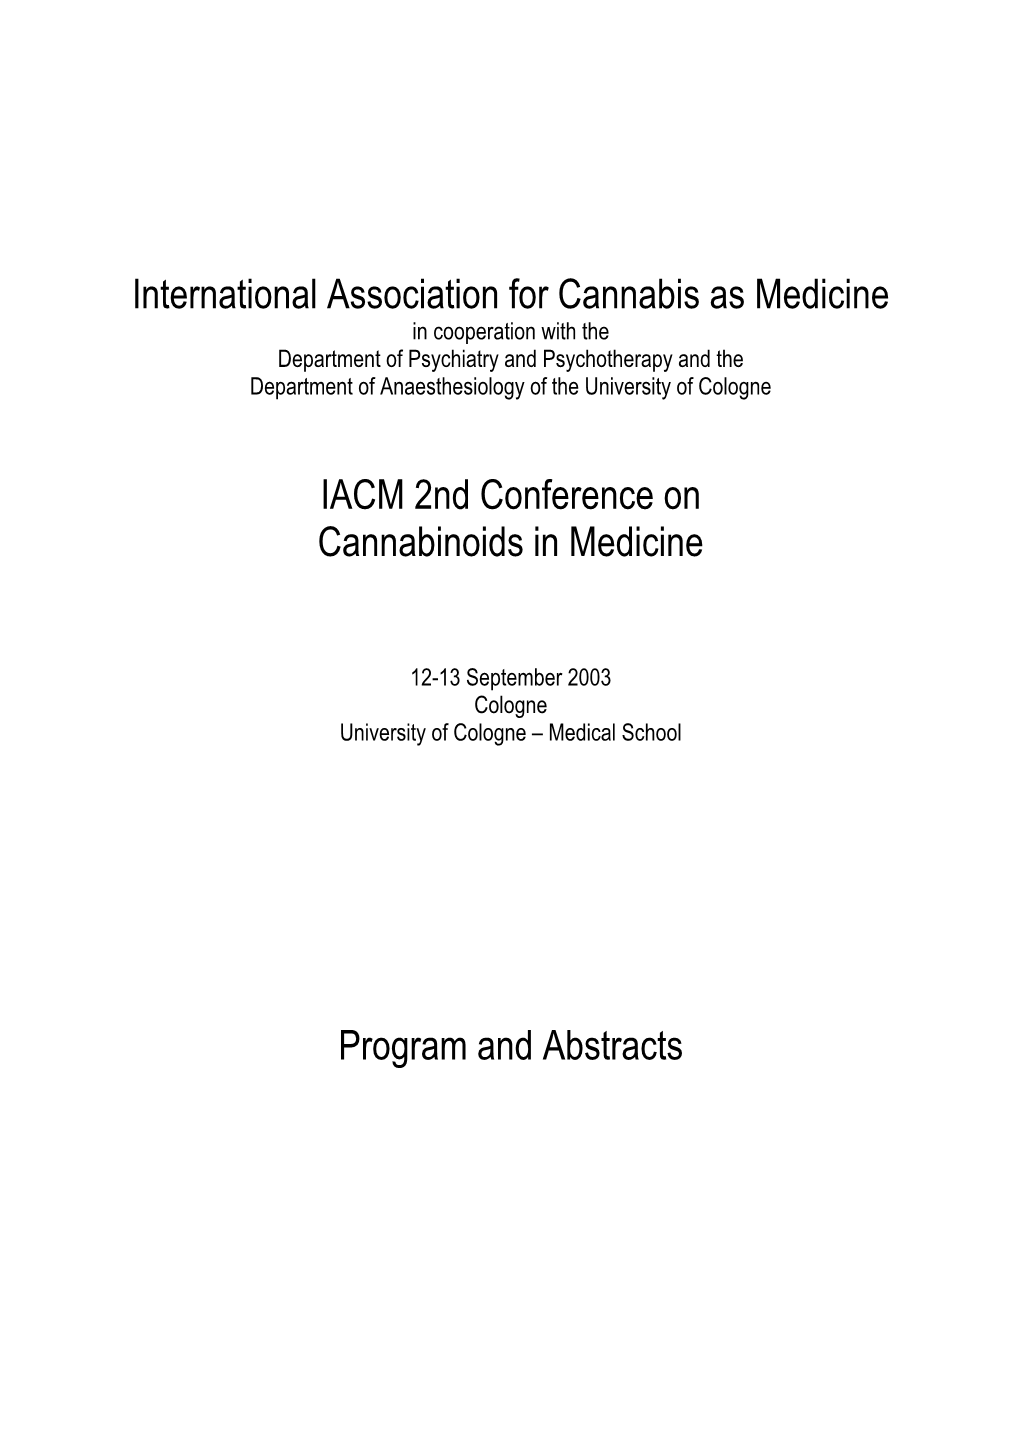 International Association for Cannabis As Medicine IACM 2Nd Conference on Cannabinoids in Medicine Program and Abstracts